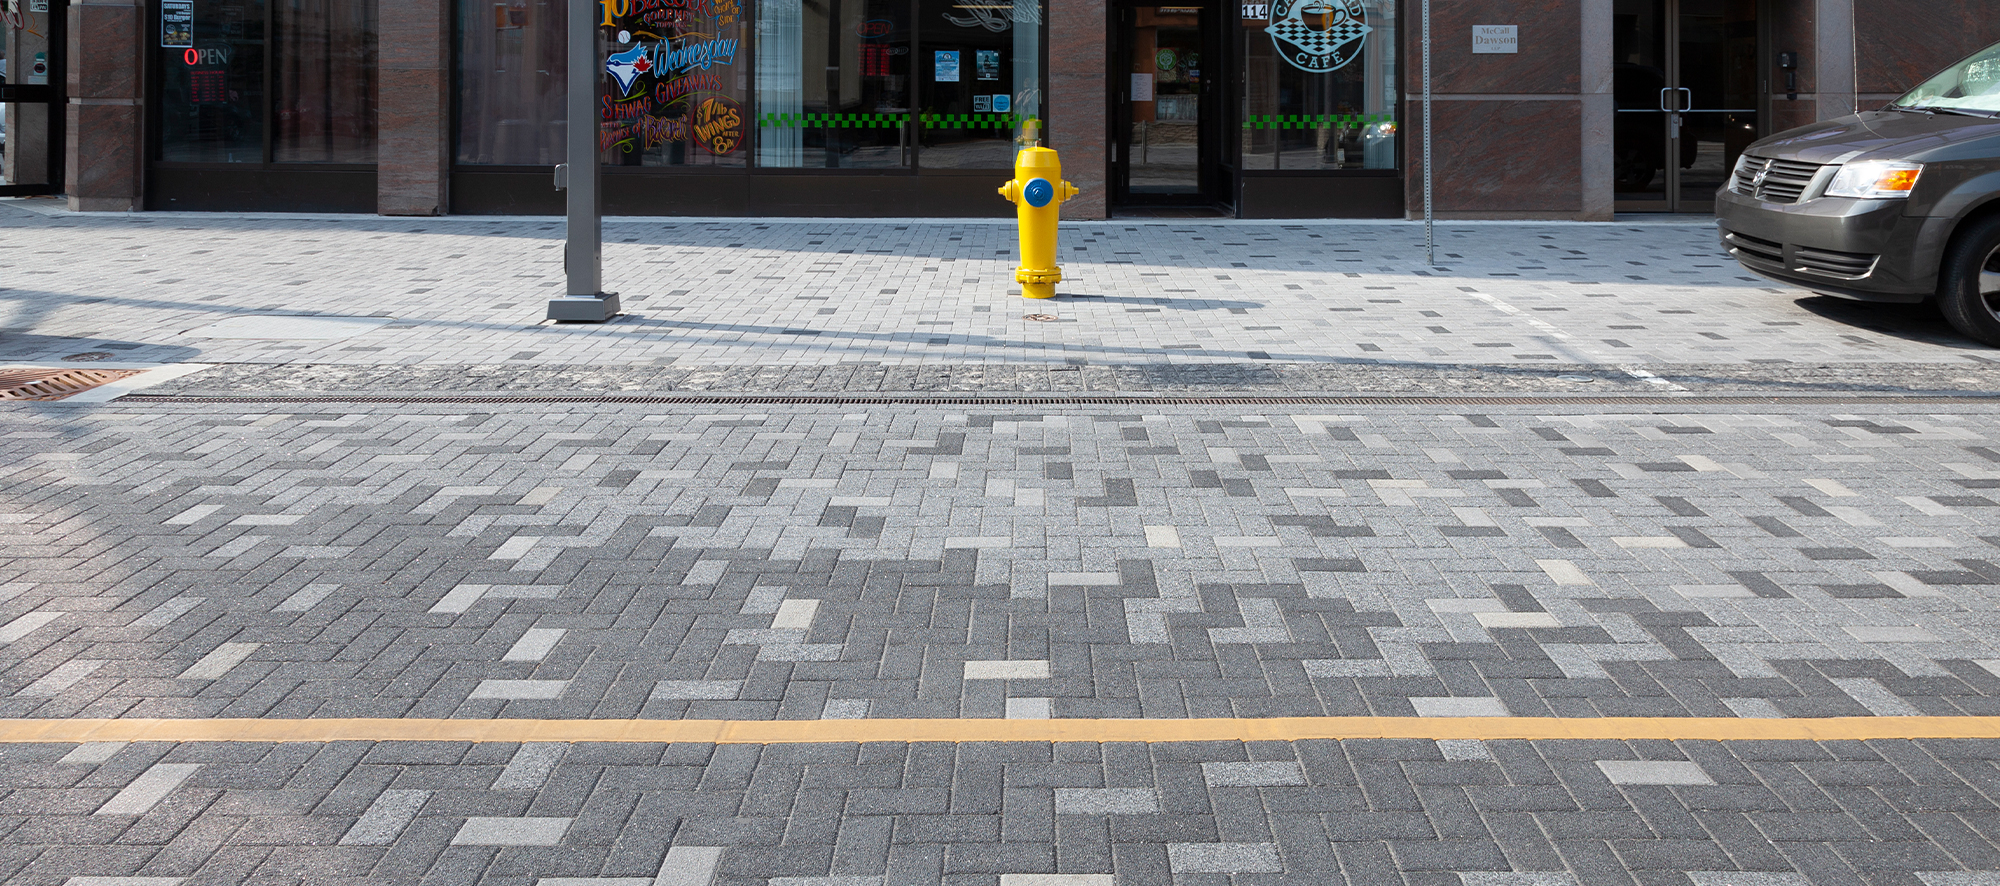 A car is parked near a hydrant at Dundas Place streetscape on Series pavers with alternating tones creating patterns and delineation.